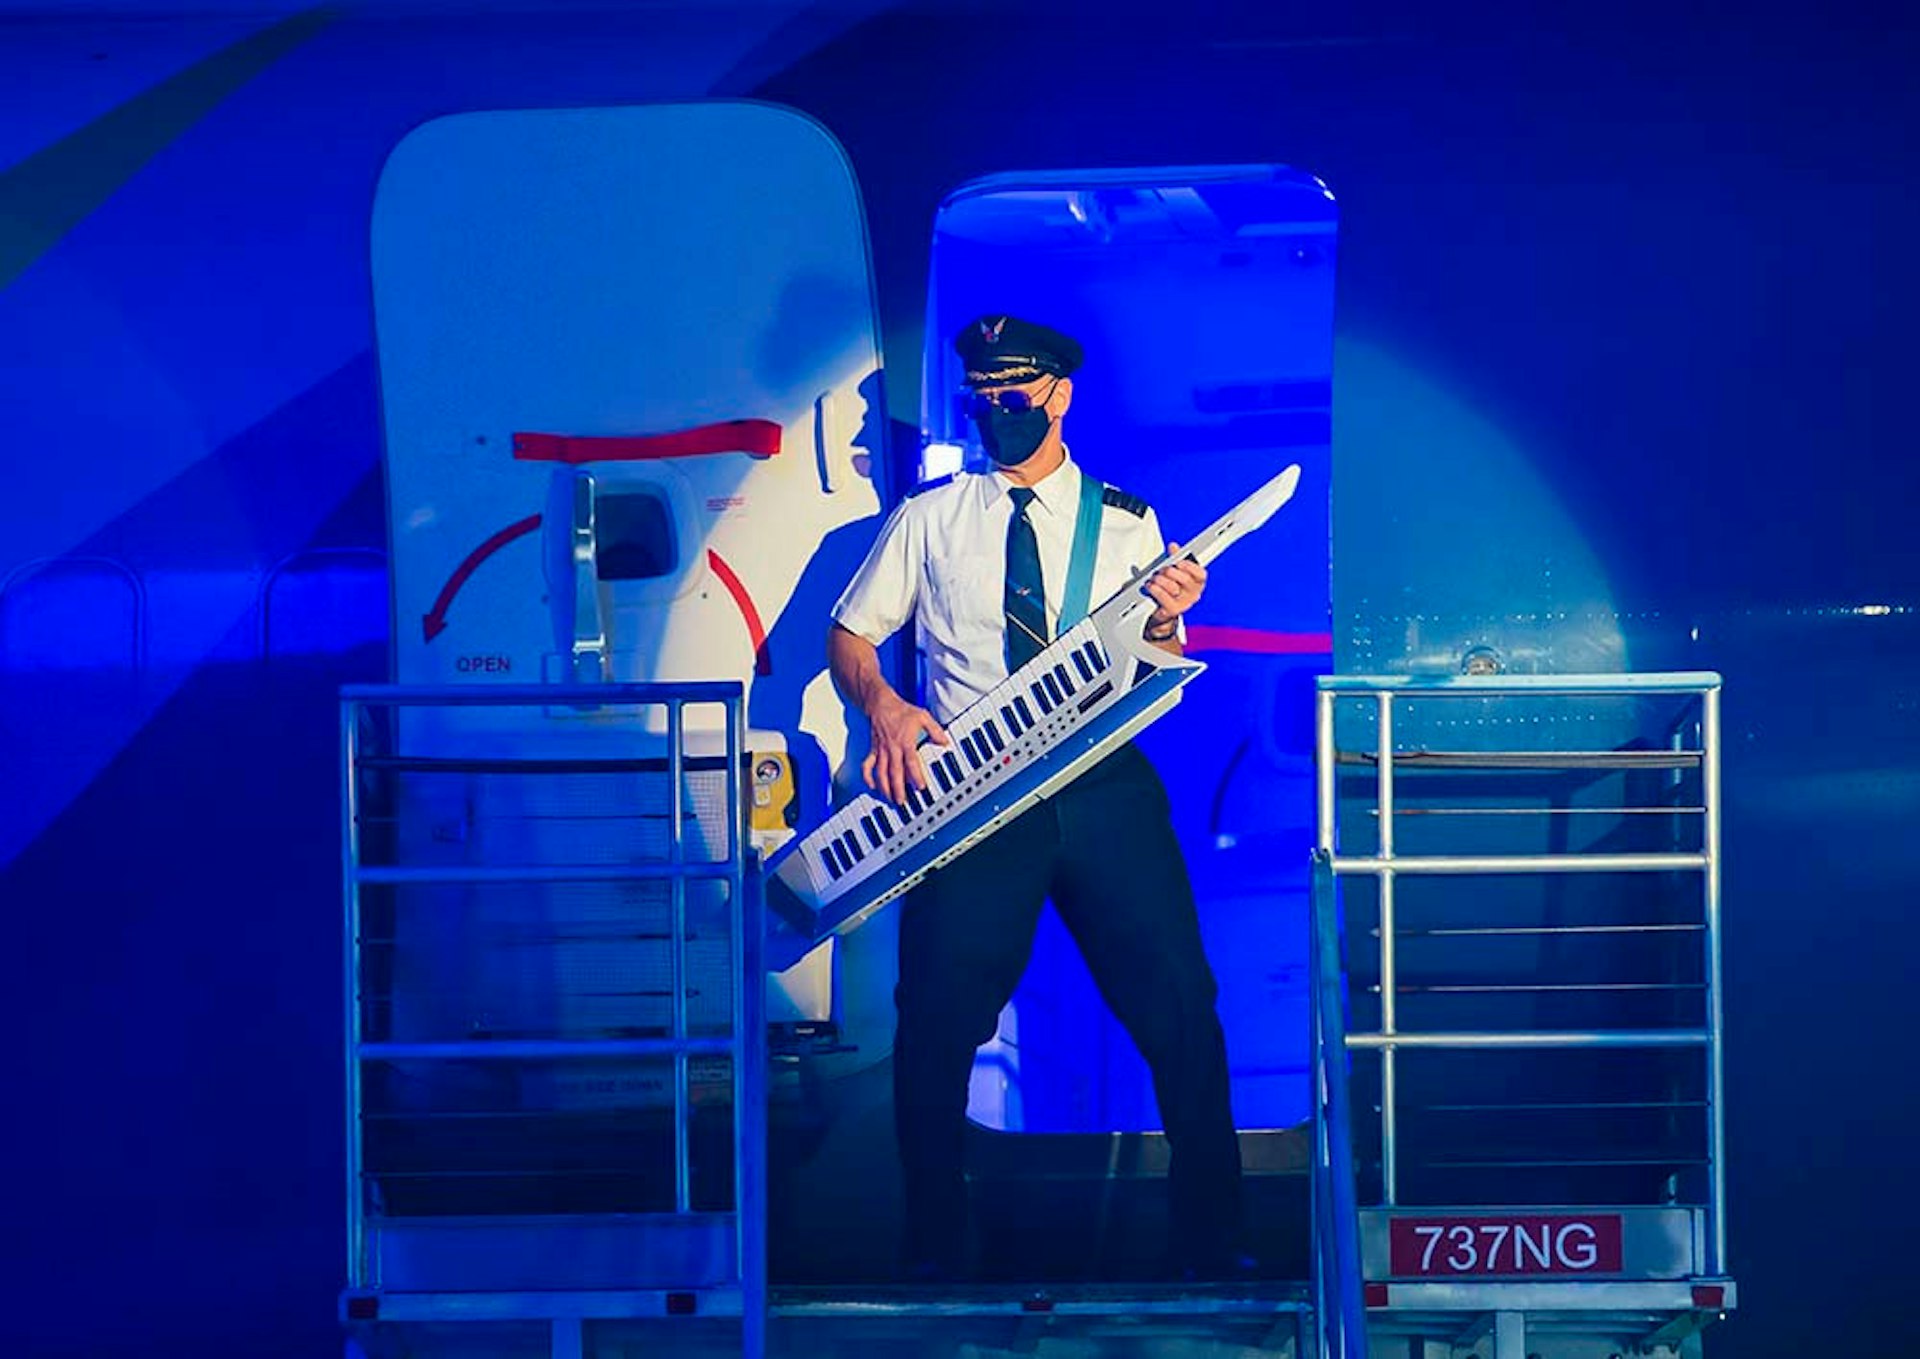 An Alaska Airlines male employee playing a musical instrument at the door of the placefor a music video